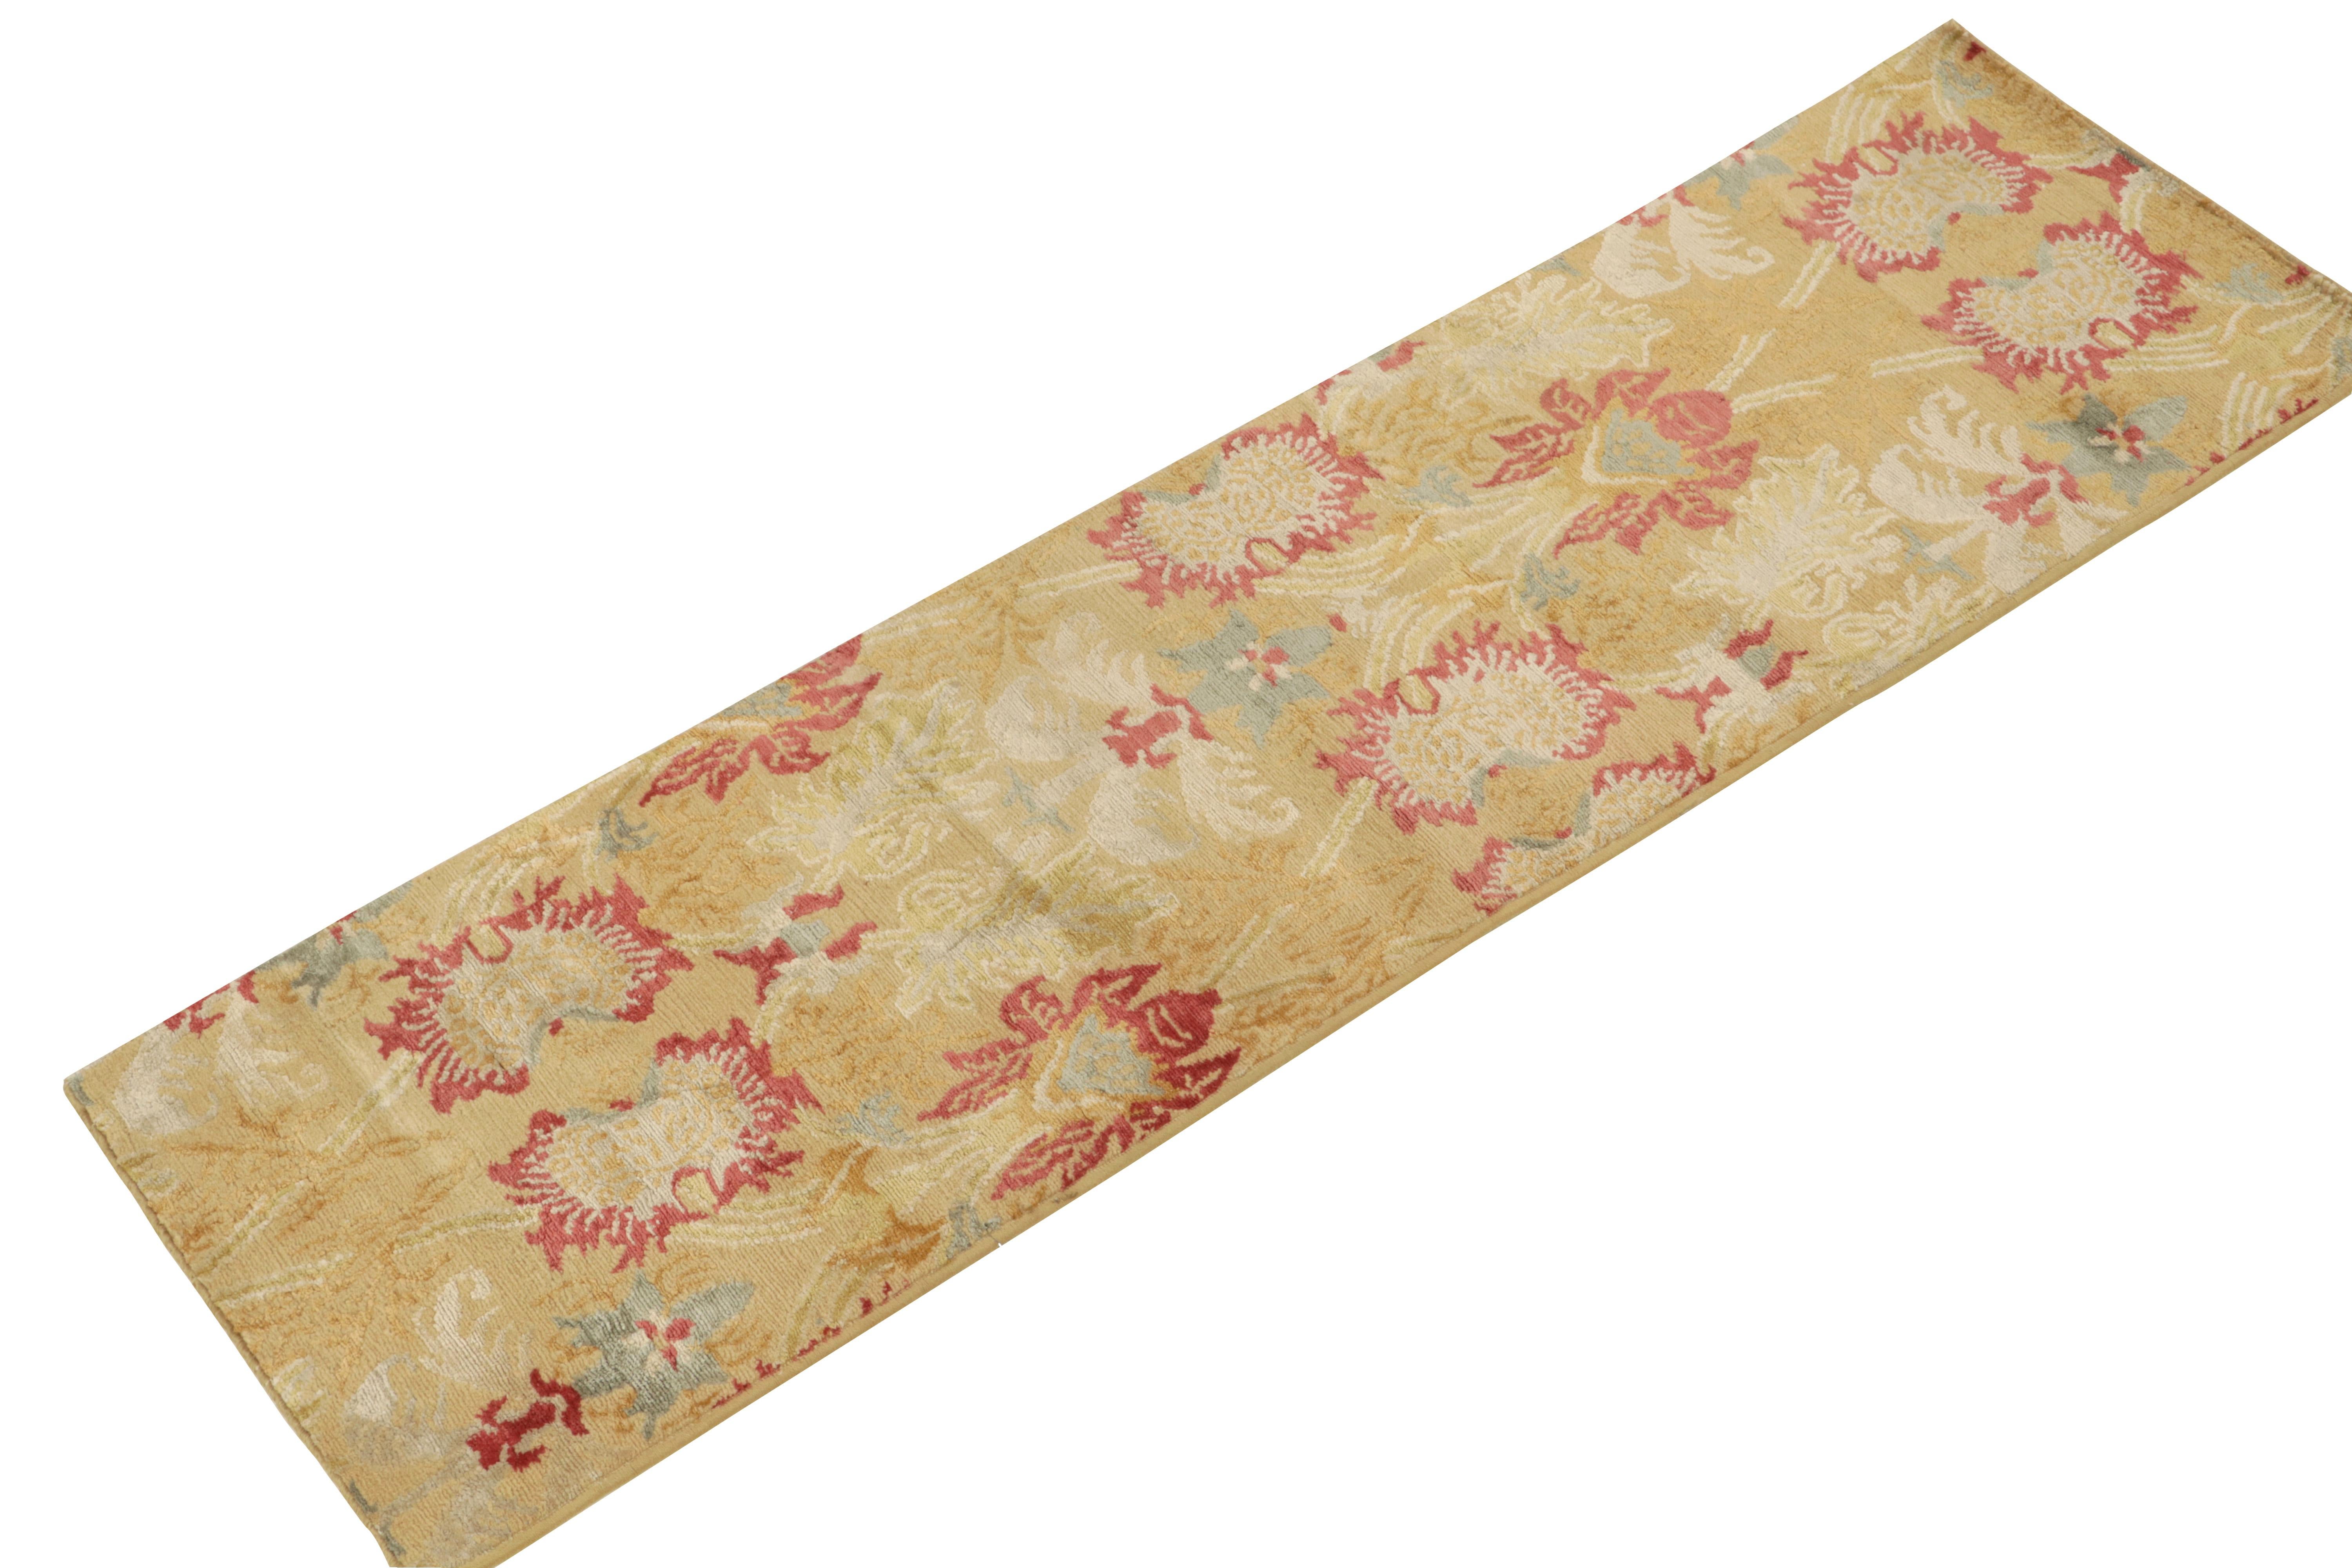 Modern Rug & Kilim's Spanish European Style Runner in Gold, Red & Blue Floral Pattern For Sale